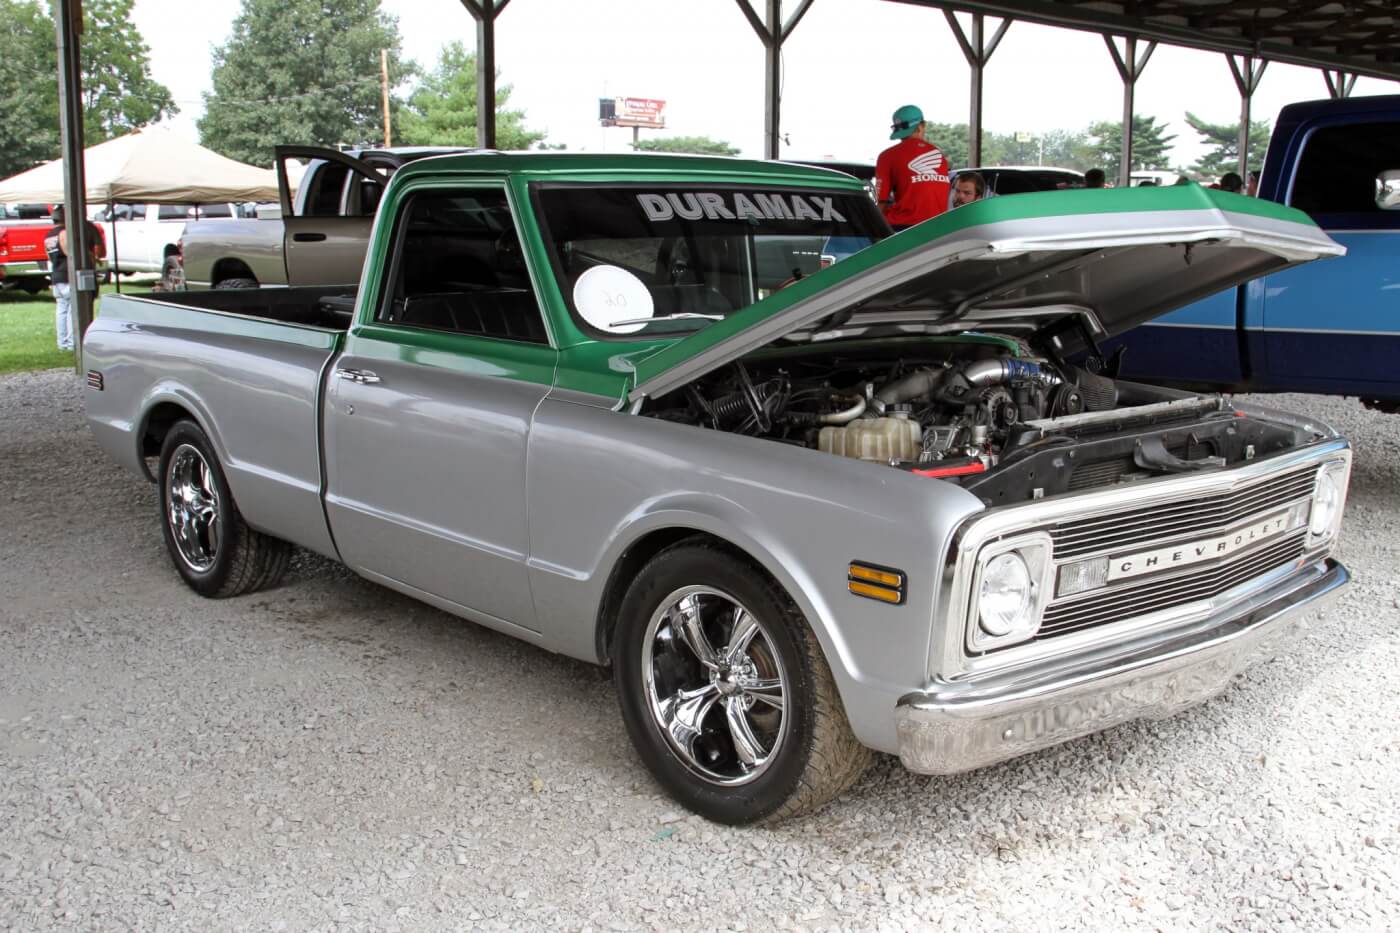 Tyler Williams’ 1969 Chevy C10 is a great looking truck. The fact that it has a Duramax engine stuffed under the hood makes it that much better and earned him the Best Custom award in Friday's Show-N-Shine.